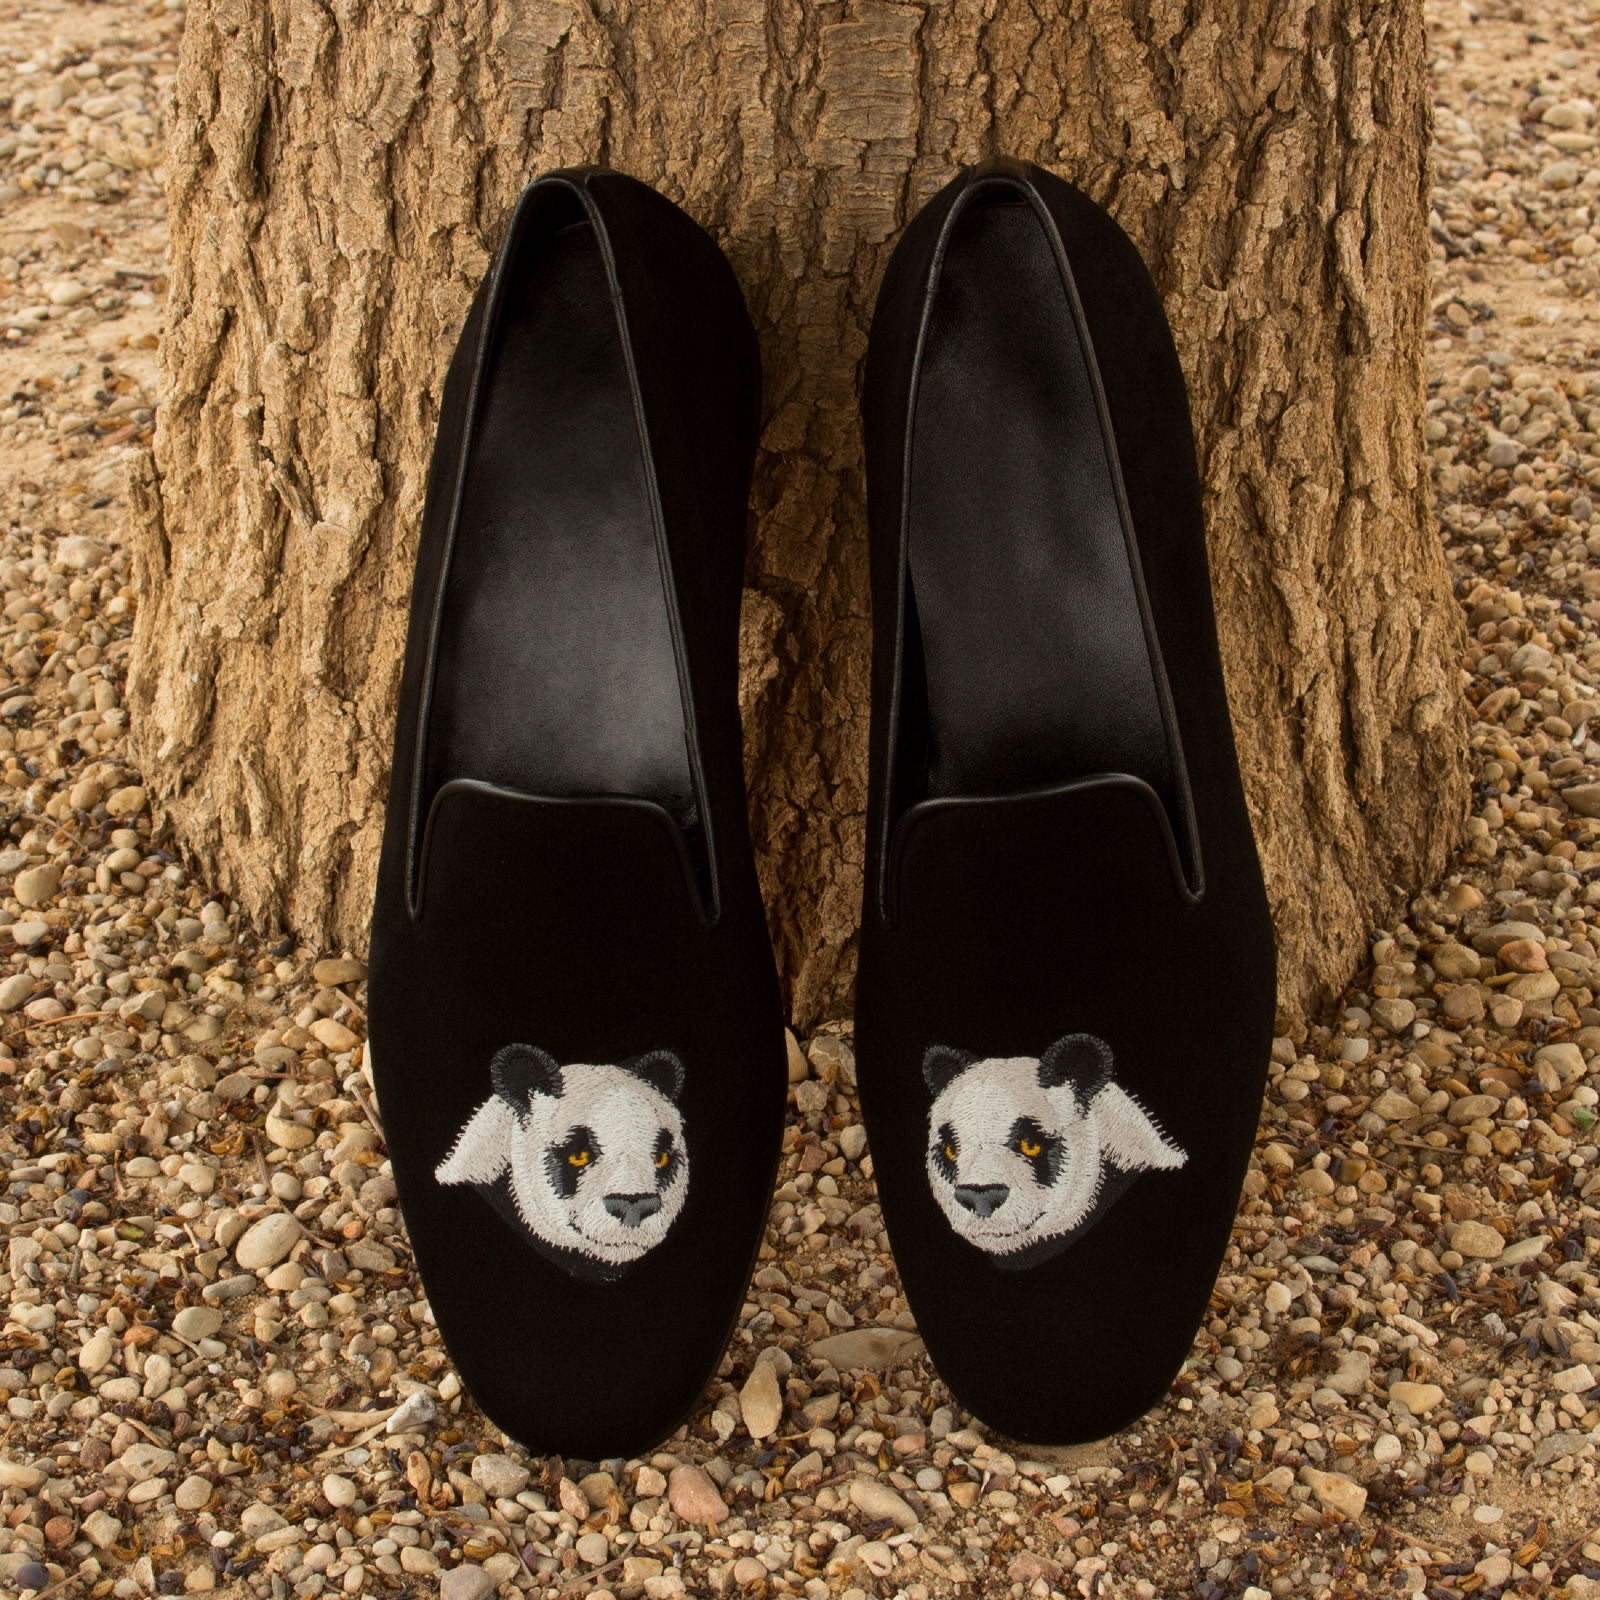 Men's Ronde Panda Embroidery Black and White Smoking Slippers in Black Suede - Maison de Kingsley Couture Harmonie et Fureur Spain